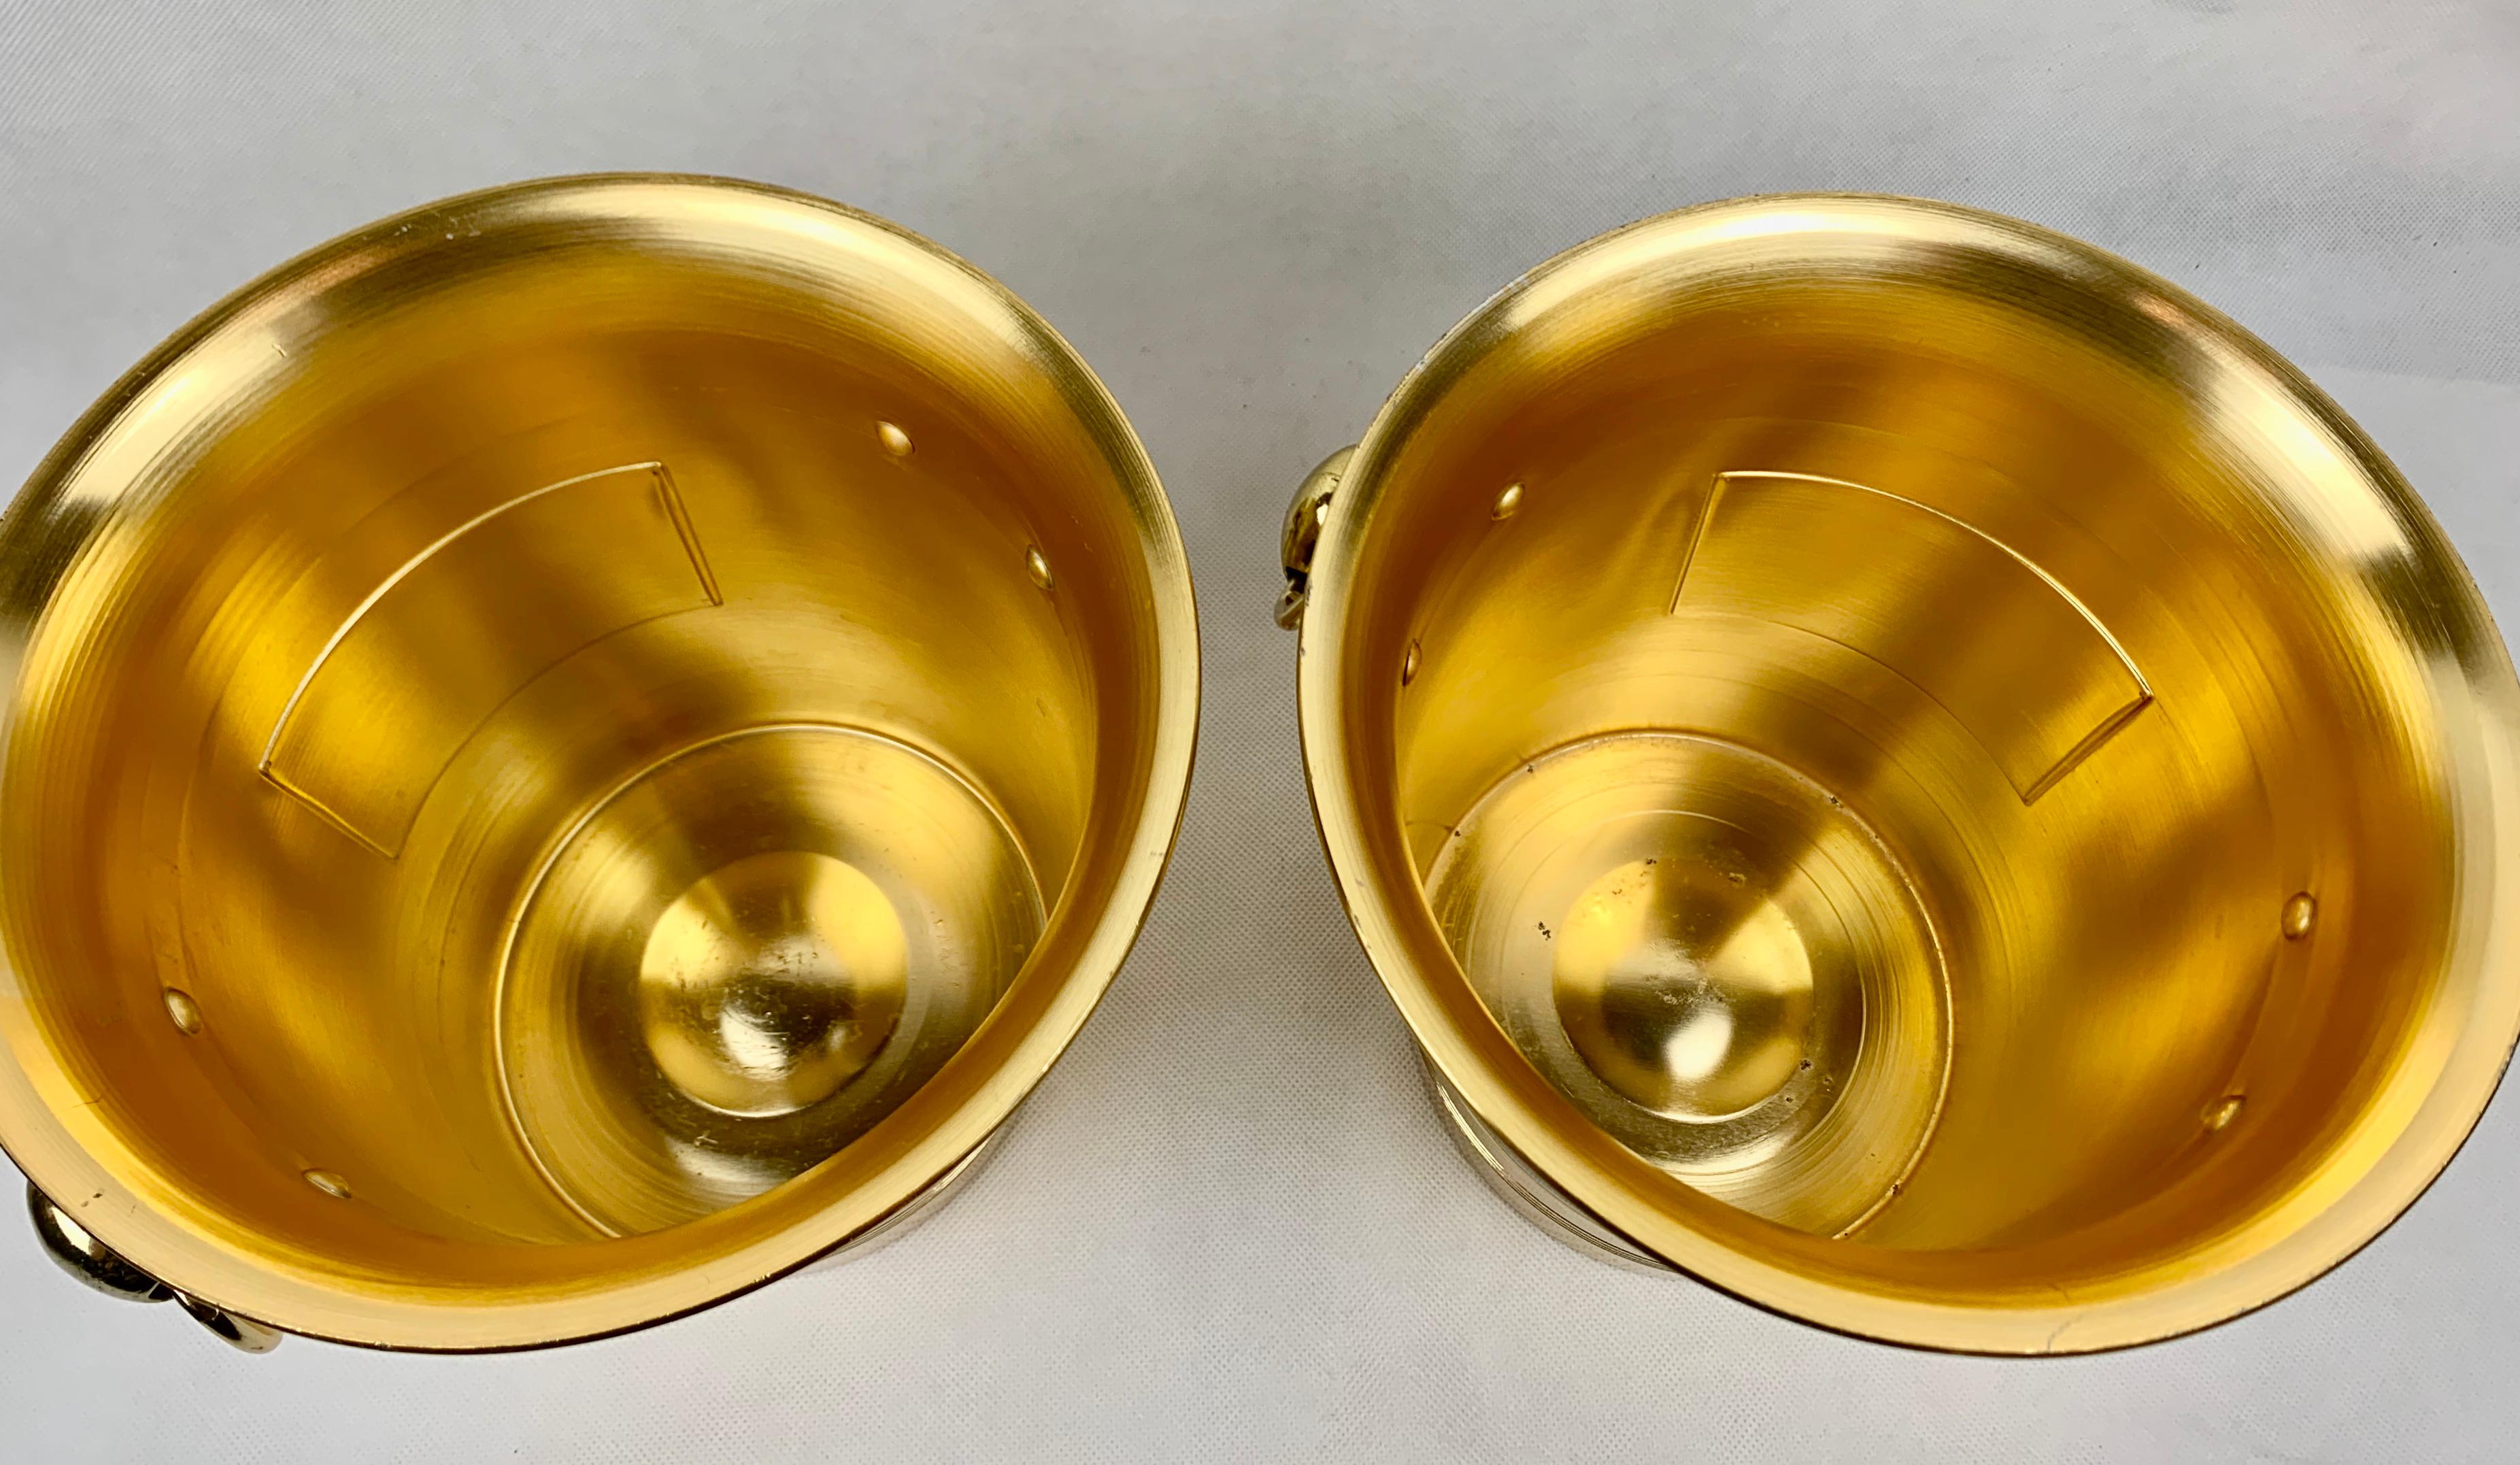 Aluminum A Pair of Martini & Rossi Golden Champagne Coolers by Vogalu, France, c, 1990